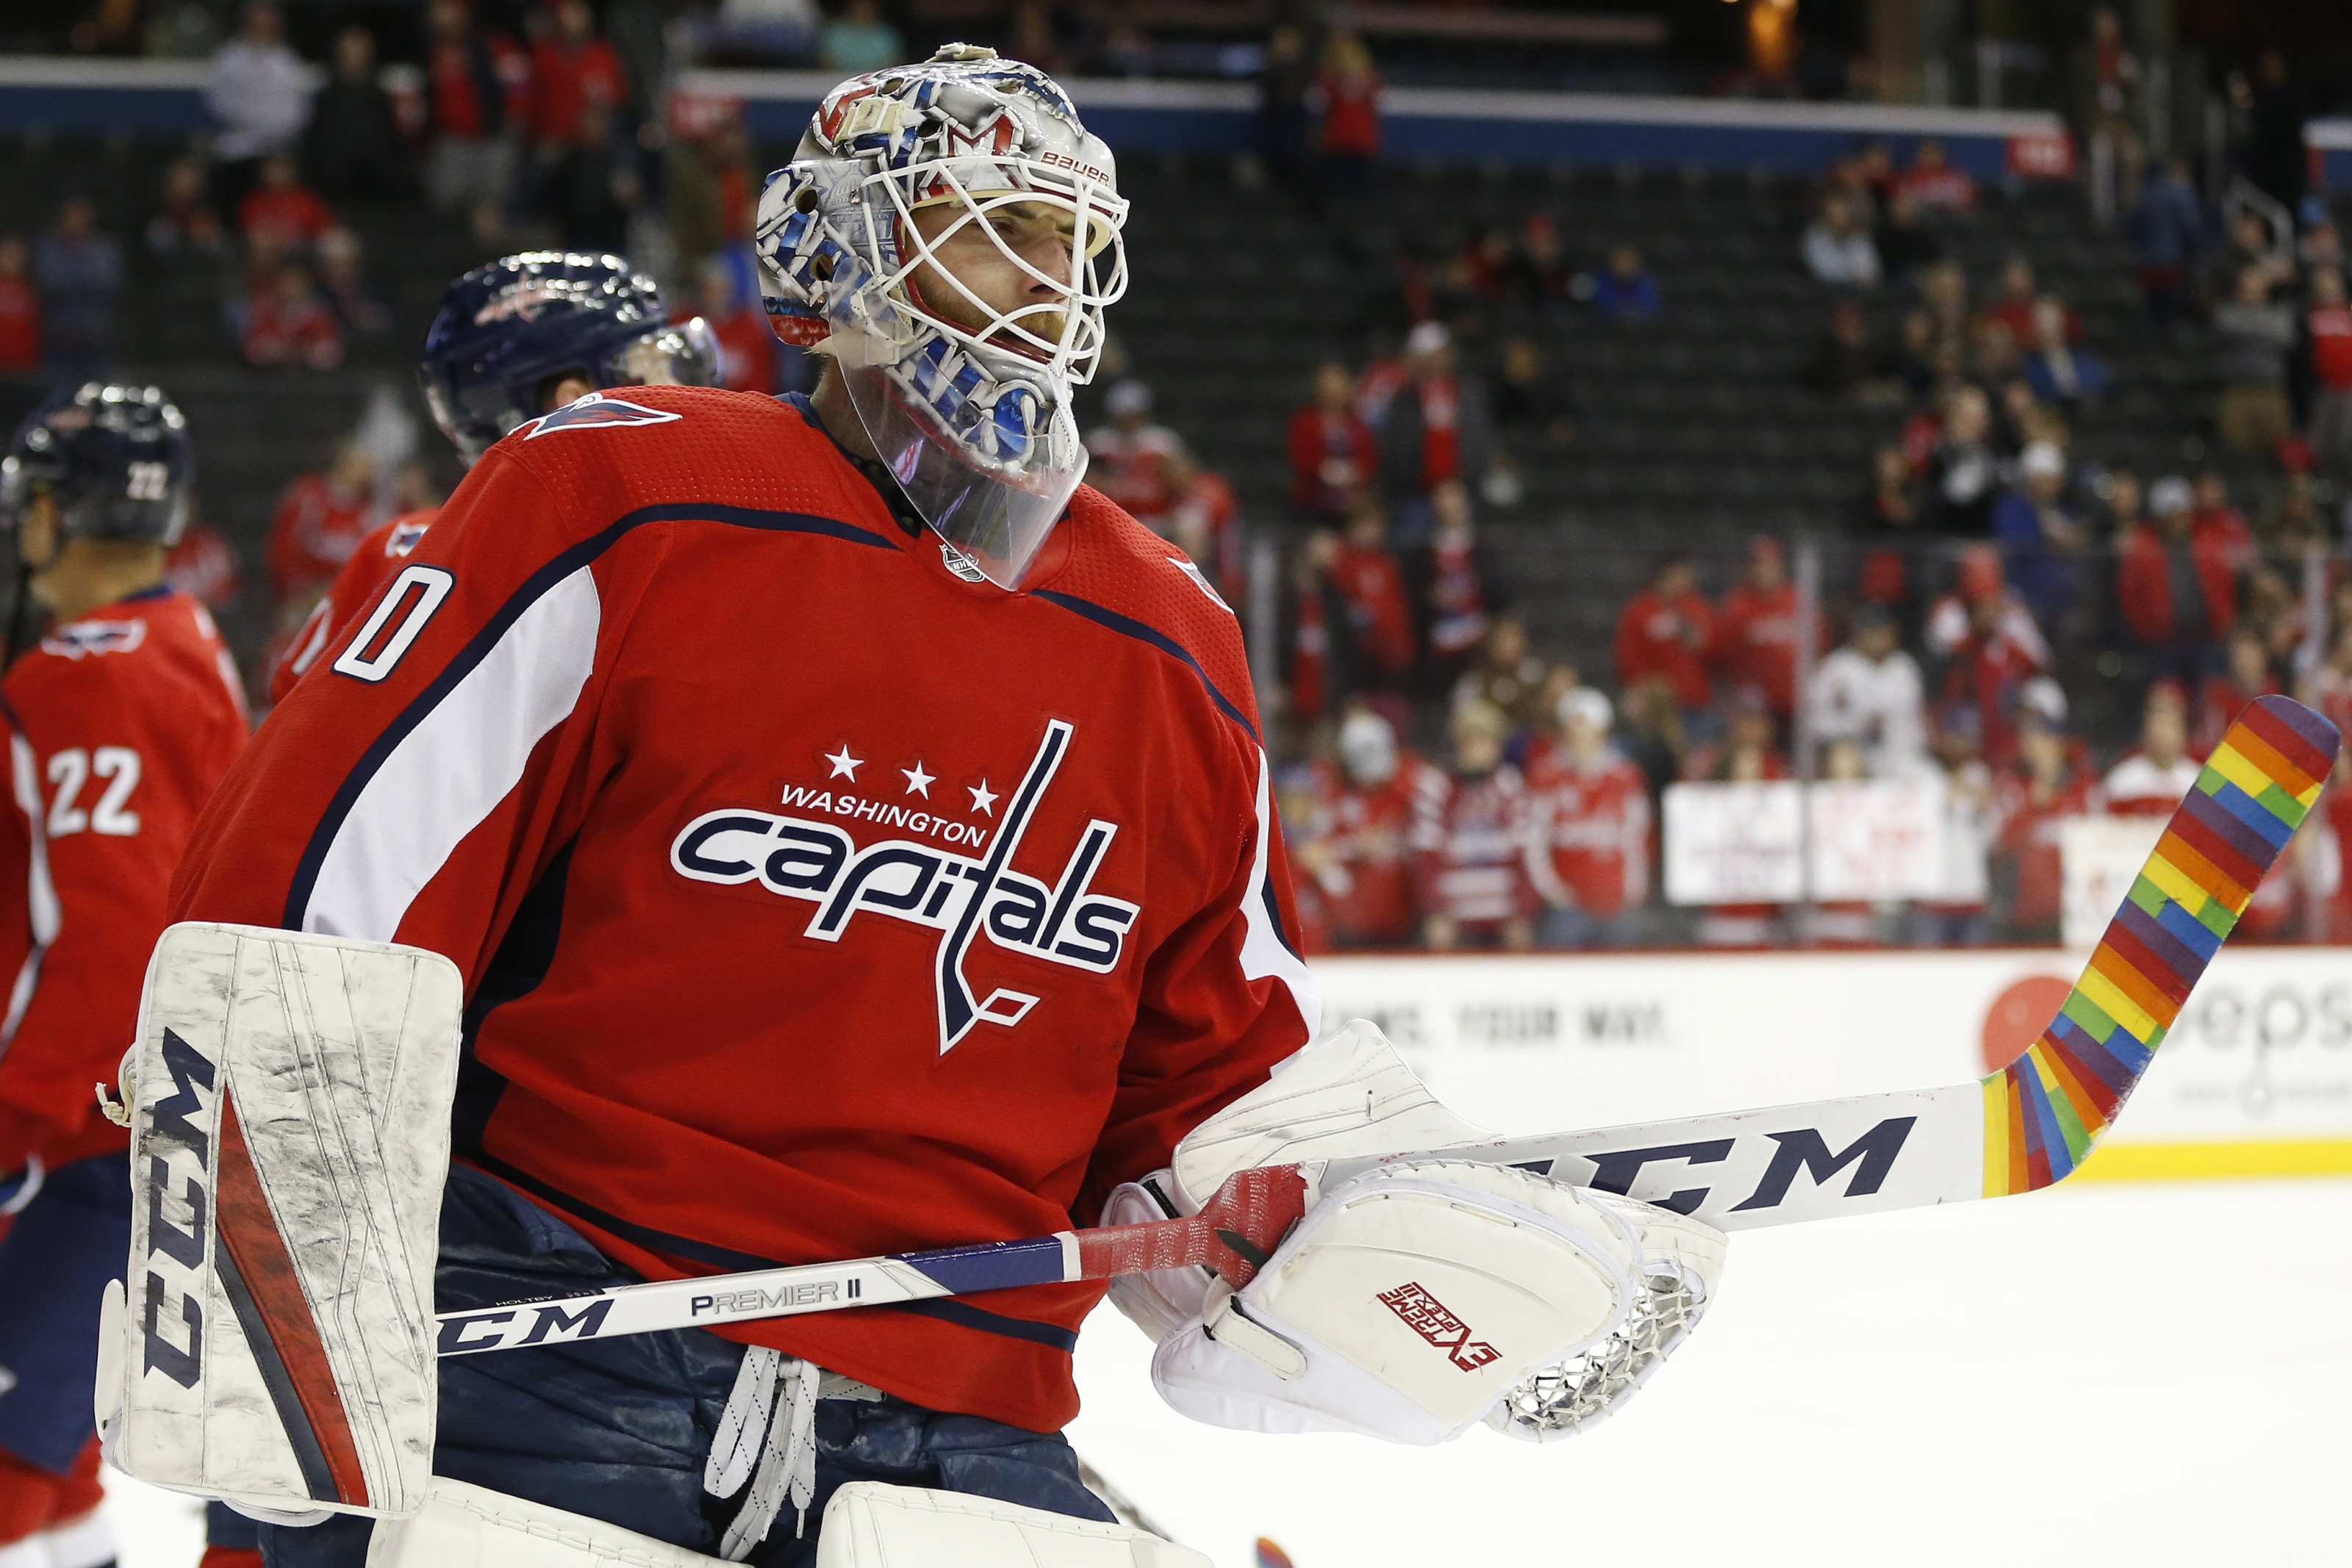 Capitals goalie Braden Holtby to participate in Capital Pride Parade